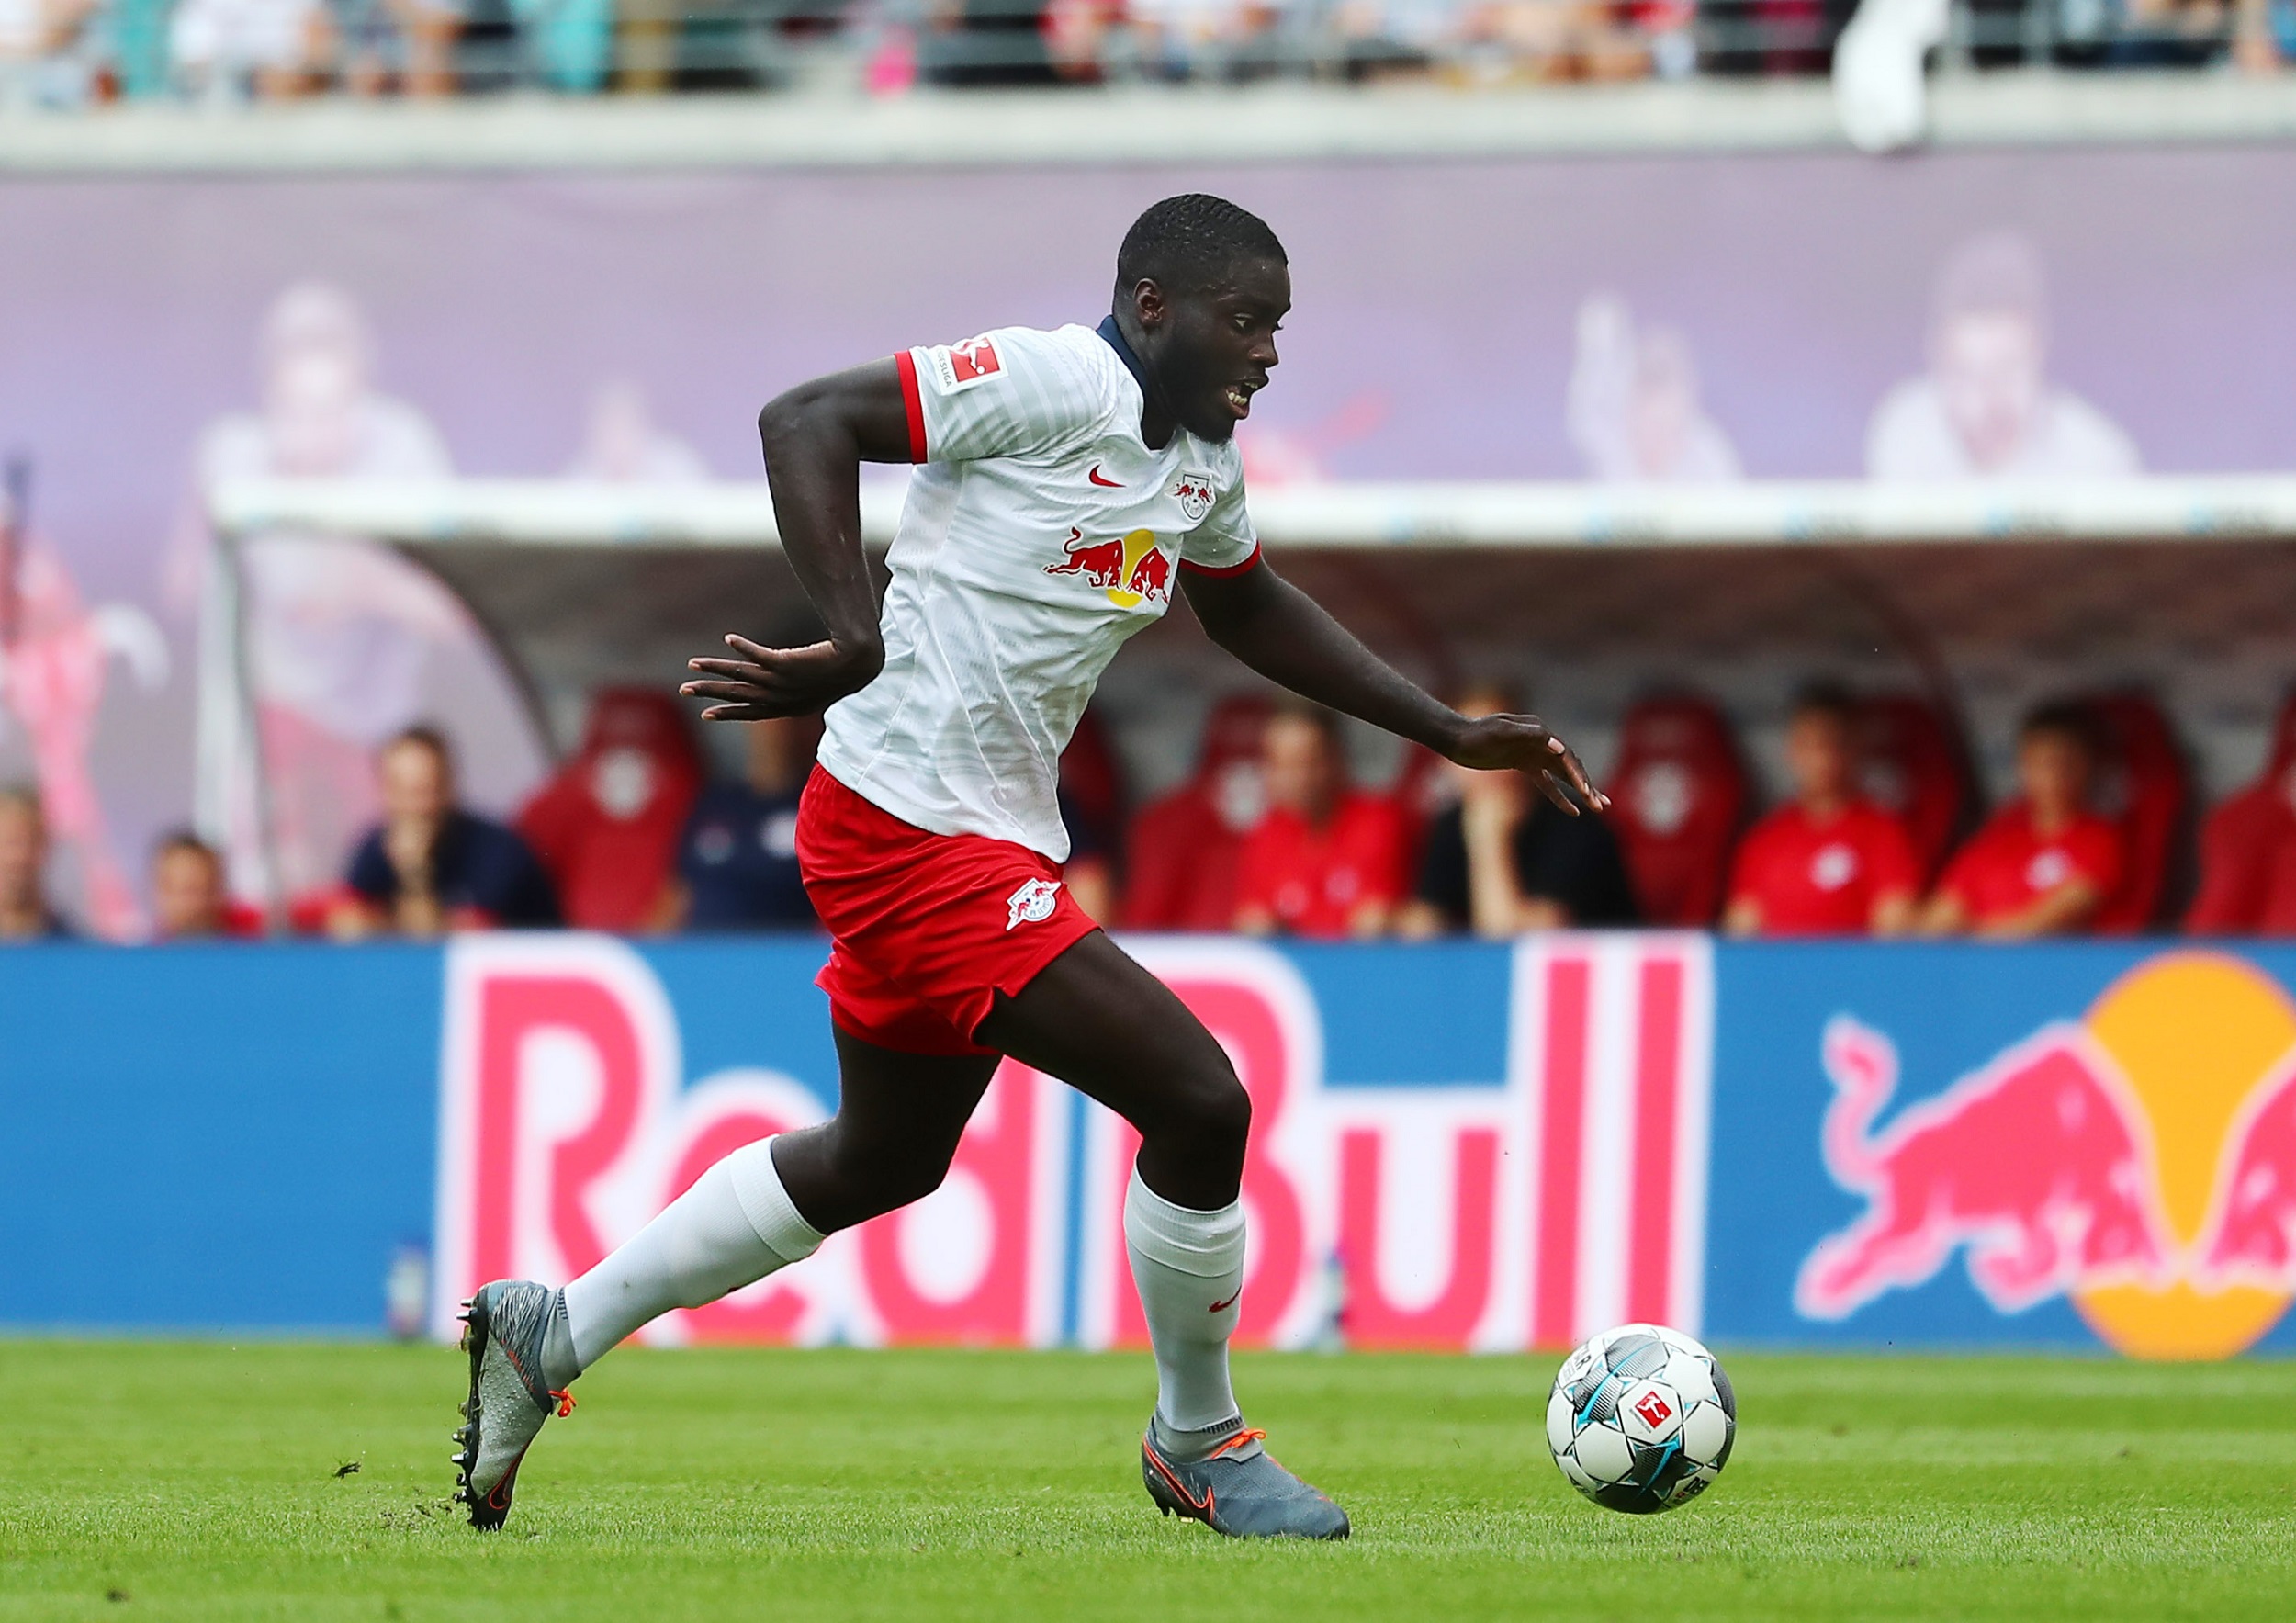 LEIPZIG,GERMANY,03.AUG.19 - SOCCER - 1. DFL, 1. Deutsche Bundesliga, Premier League, RasenBallsport Leipzig vs Aston Villa, test match. Image shows Dayot Upamecano (RB Leipzig). Photo: GEPA pictures/ Roger Petzsche - For editorial use only. Image is free of charge.